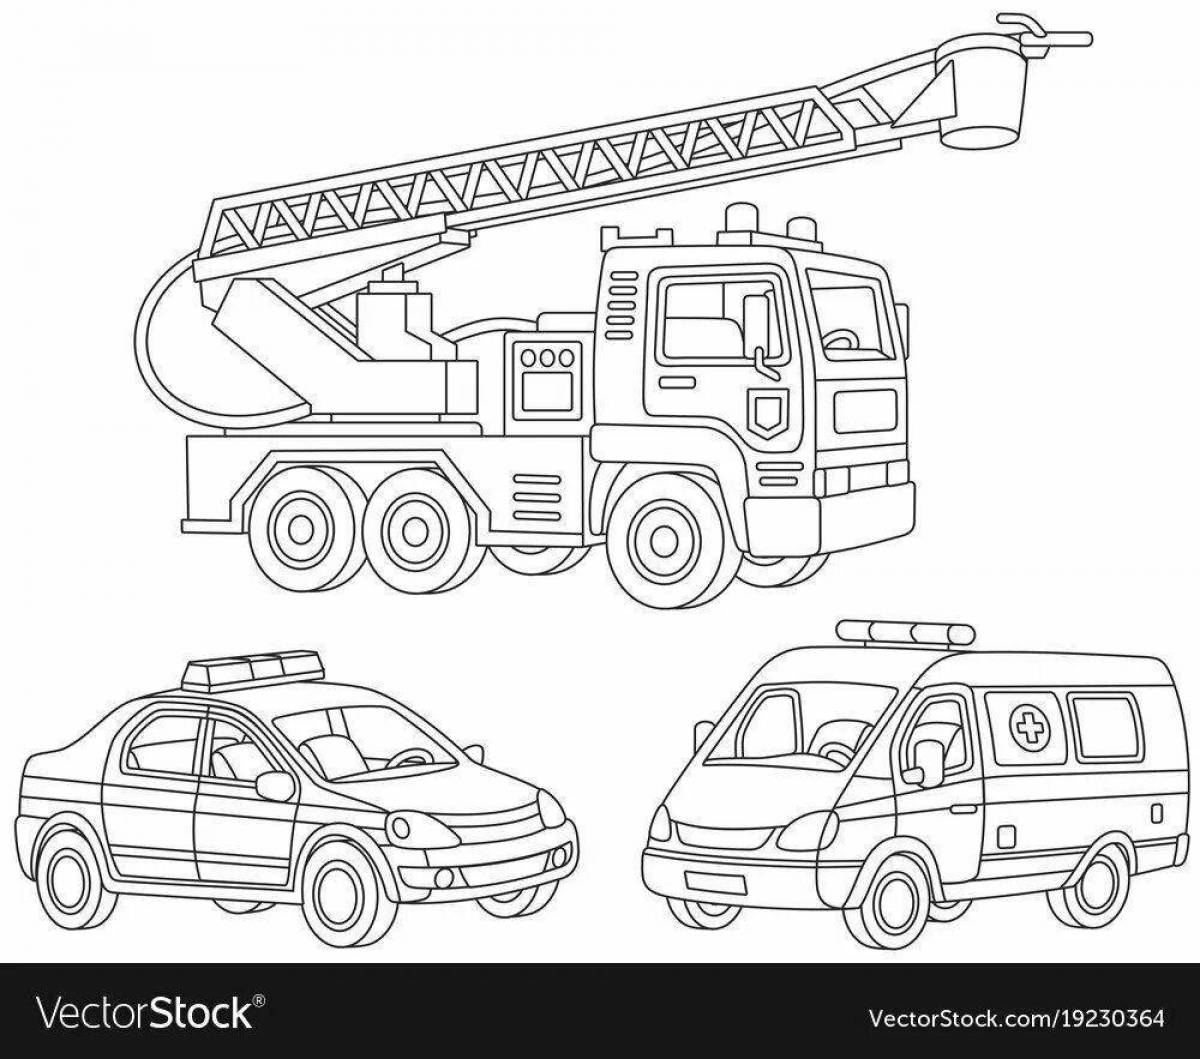 Radiant emergency service coloring page